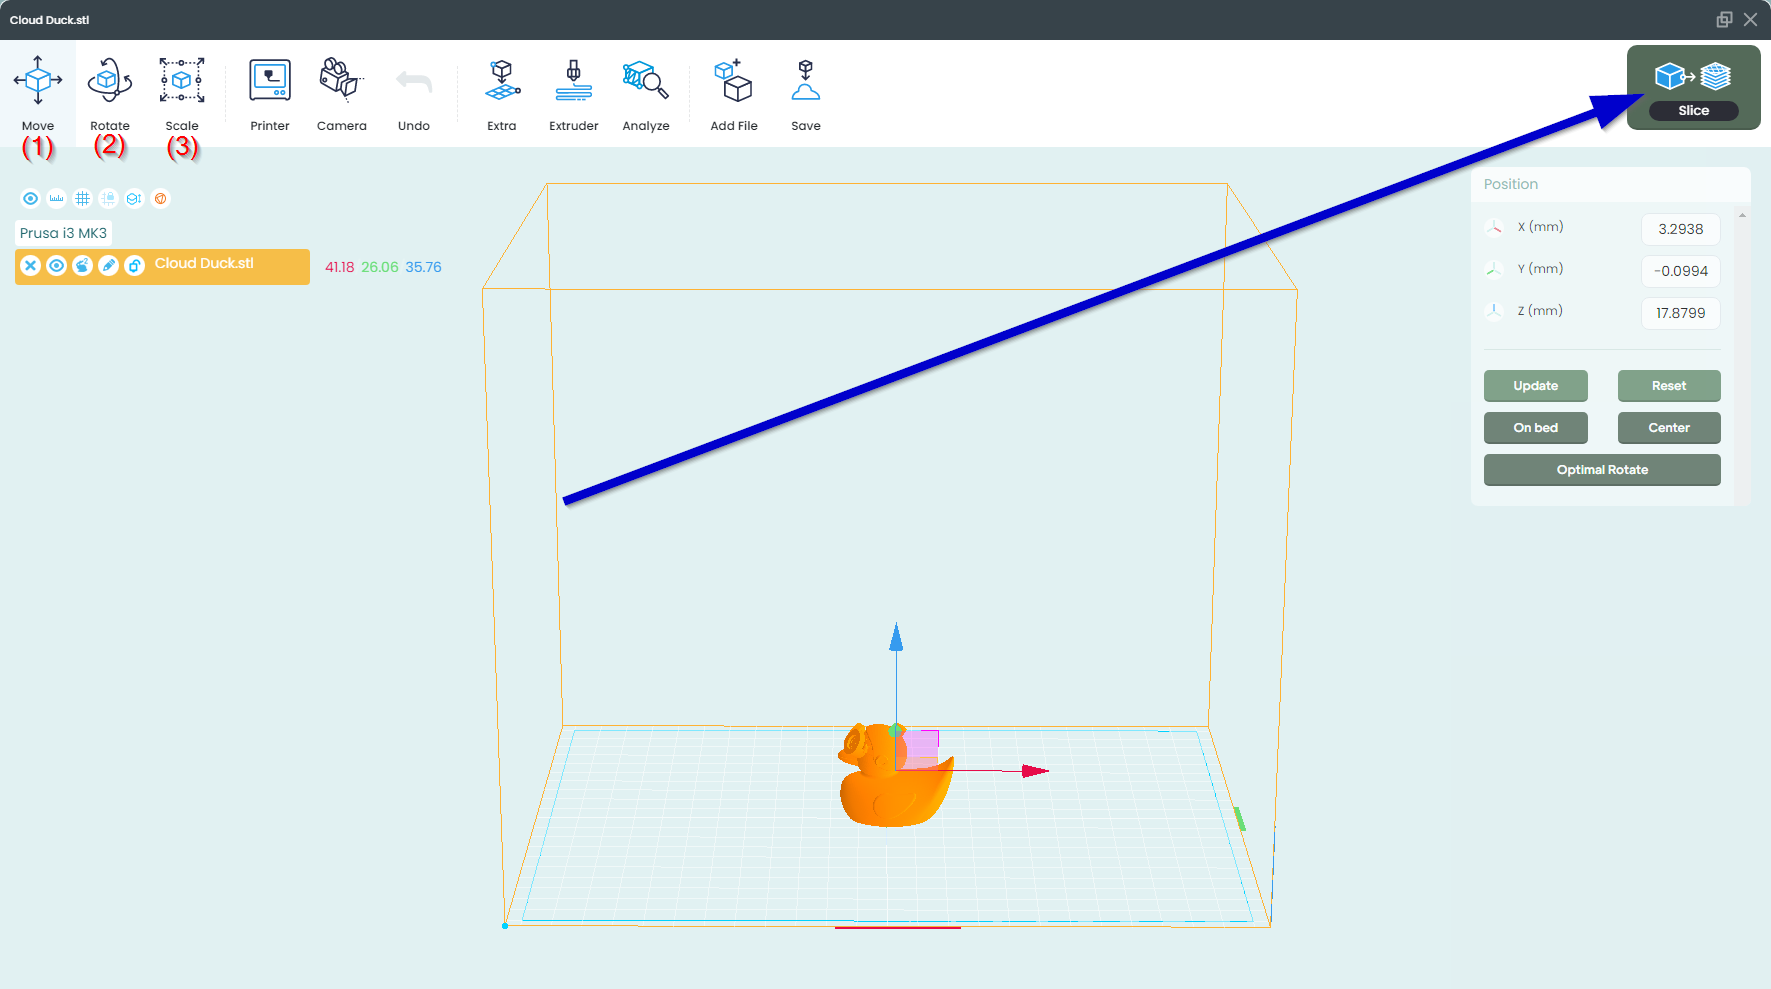 3DPrinterOS STL Layout editor window. A (1) is located under the Move button. A (2) is under the Rotate button. A (3) is under the Scale button. A blue arrow points to the Slice Button